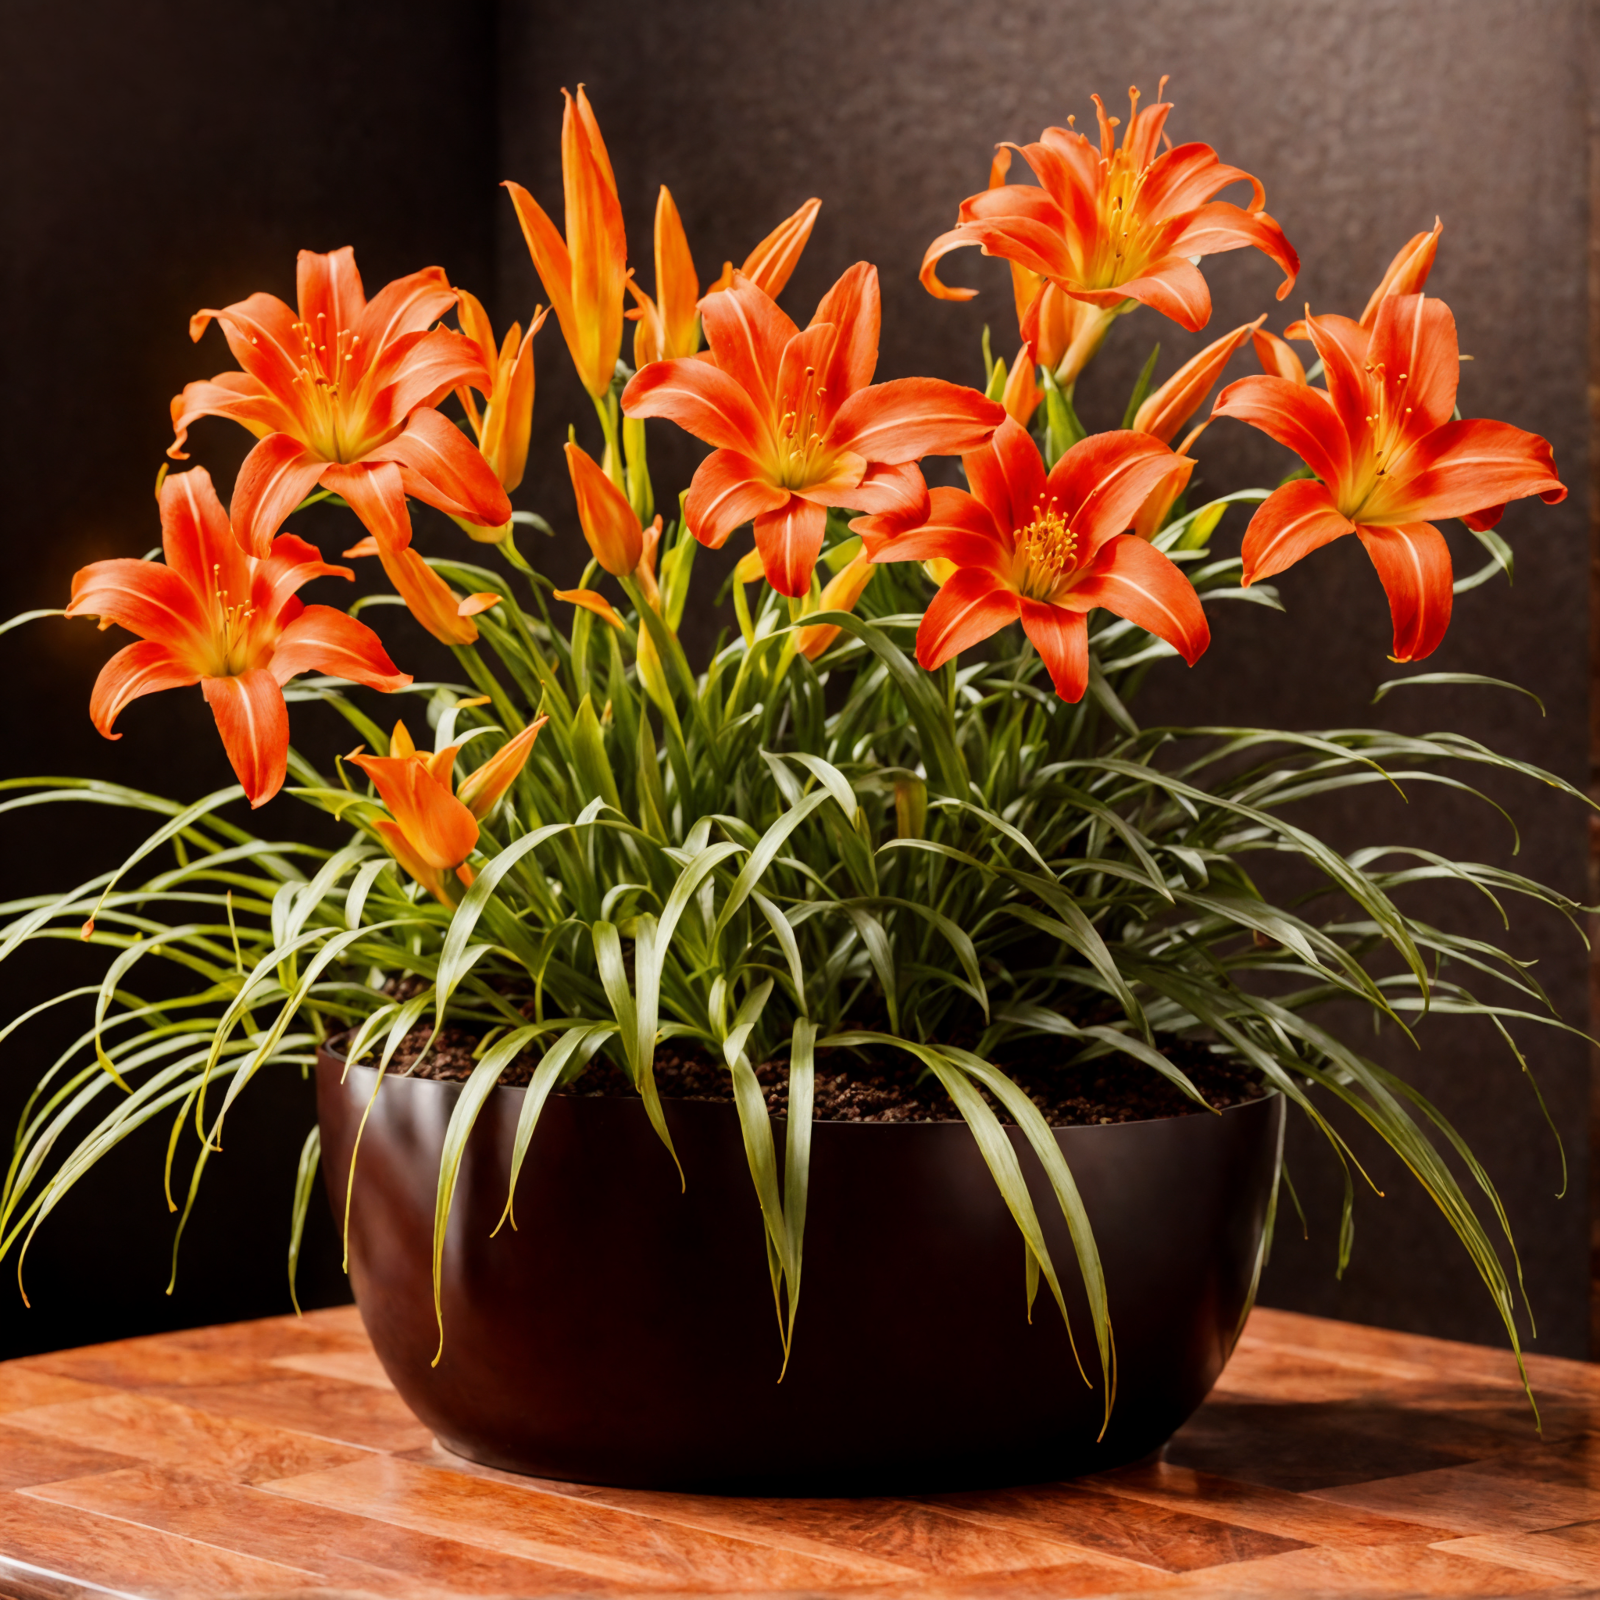 Hemerocallis fulva, or daylily, with vibrant orange blooms, set against a dark background in a neutral-toned planter.